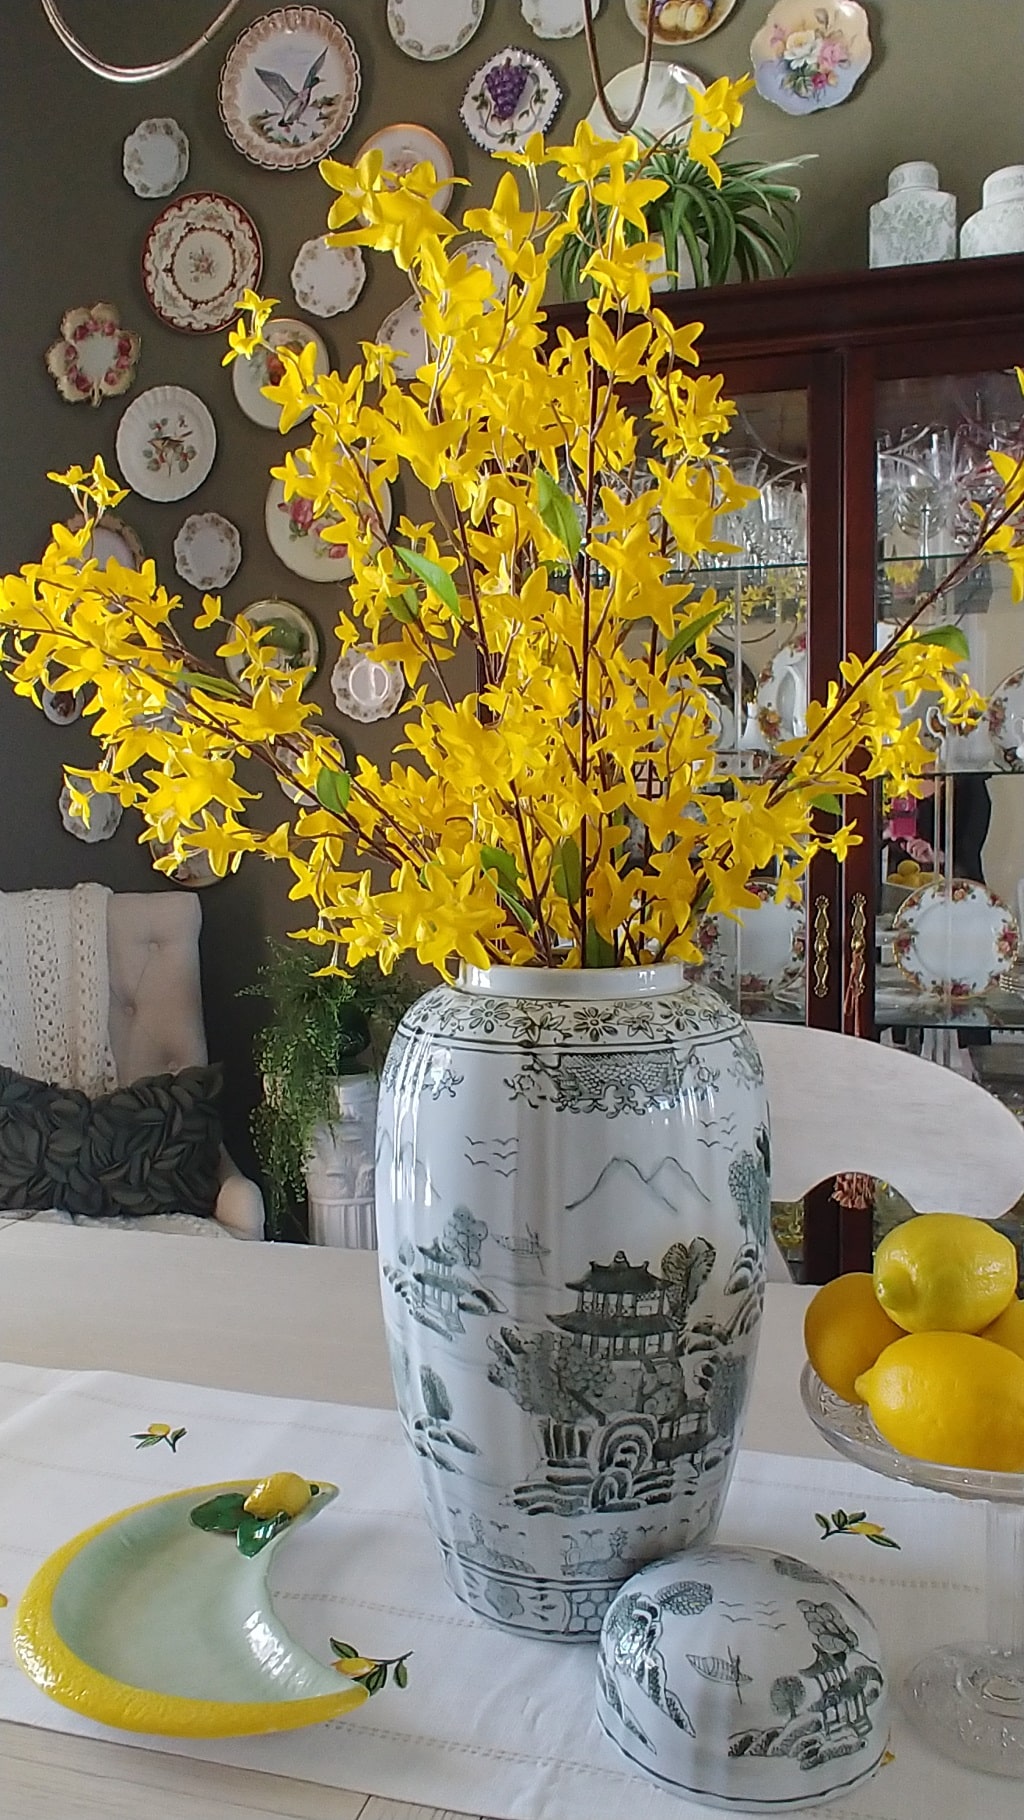 7 Spring Table Decorating Ideas – Bringing in Texture